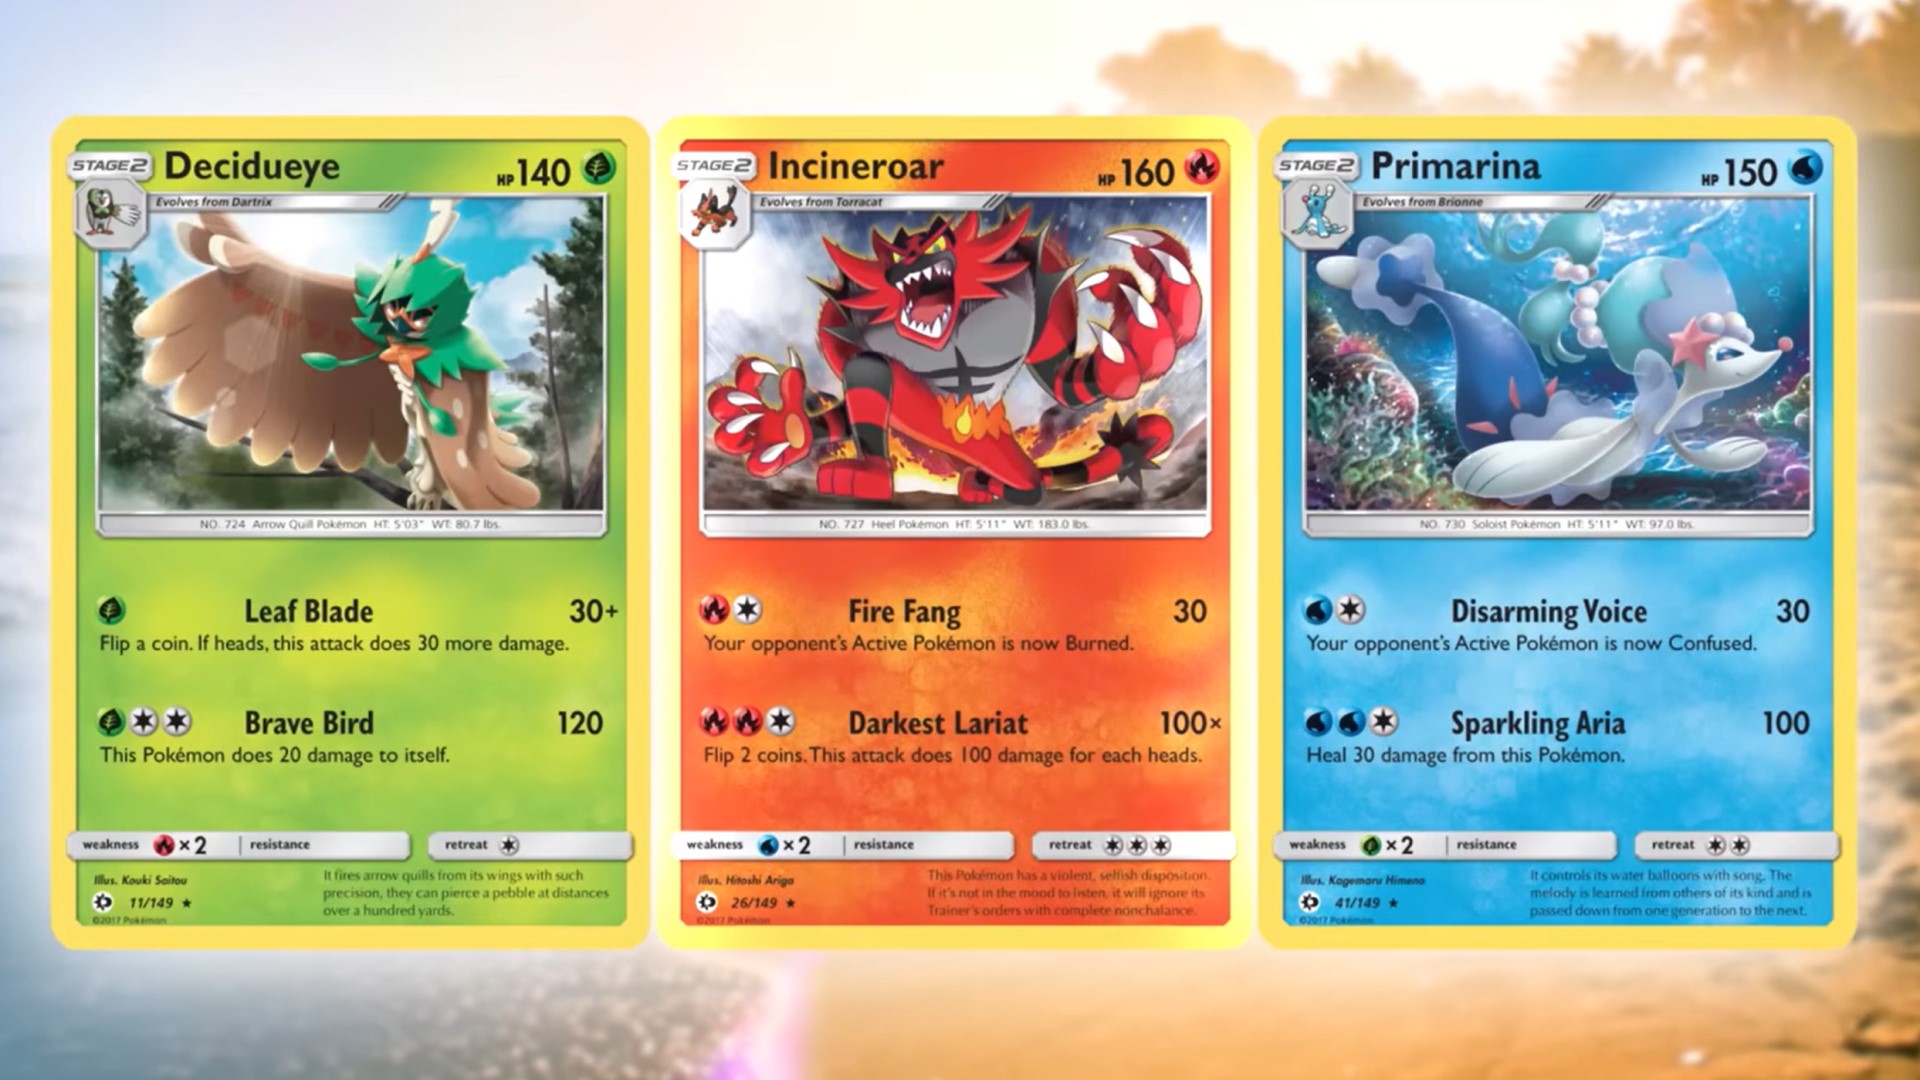 Three More Cards From Pokemon TCG 'Unbroken Bonds' Expansion